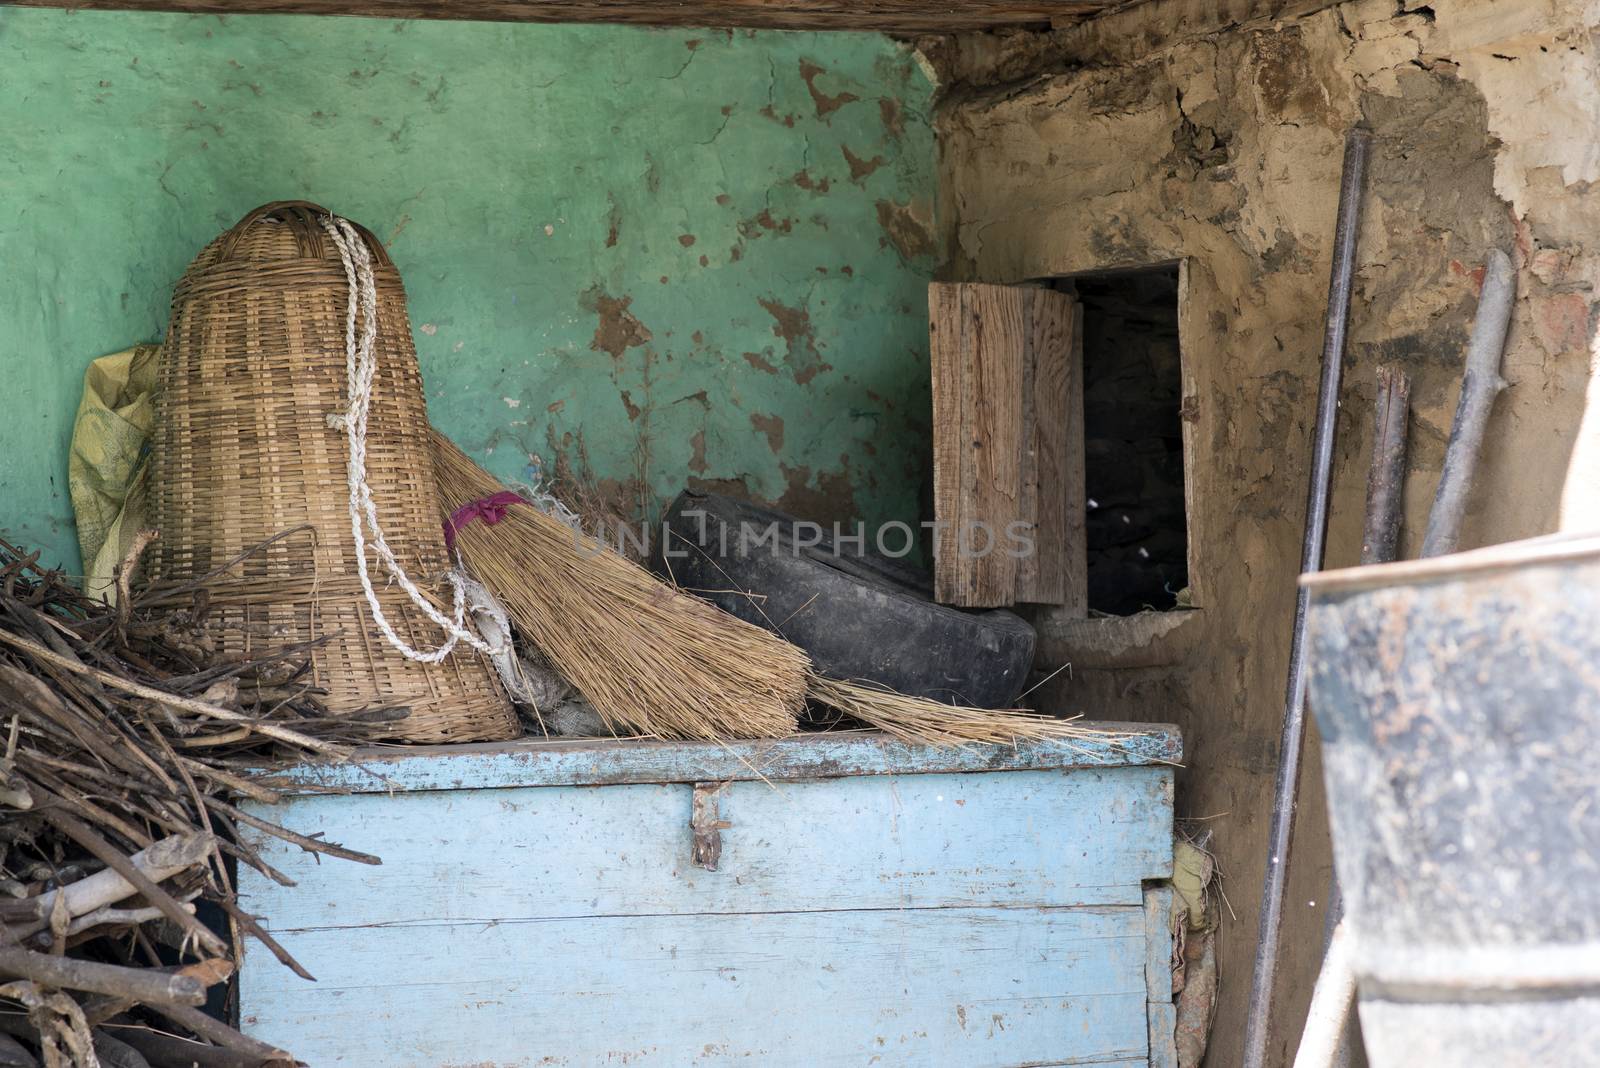 Items stored in a rural village. by dushi82